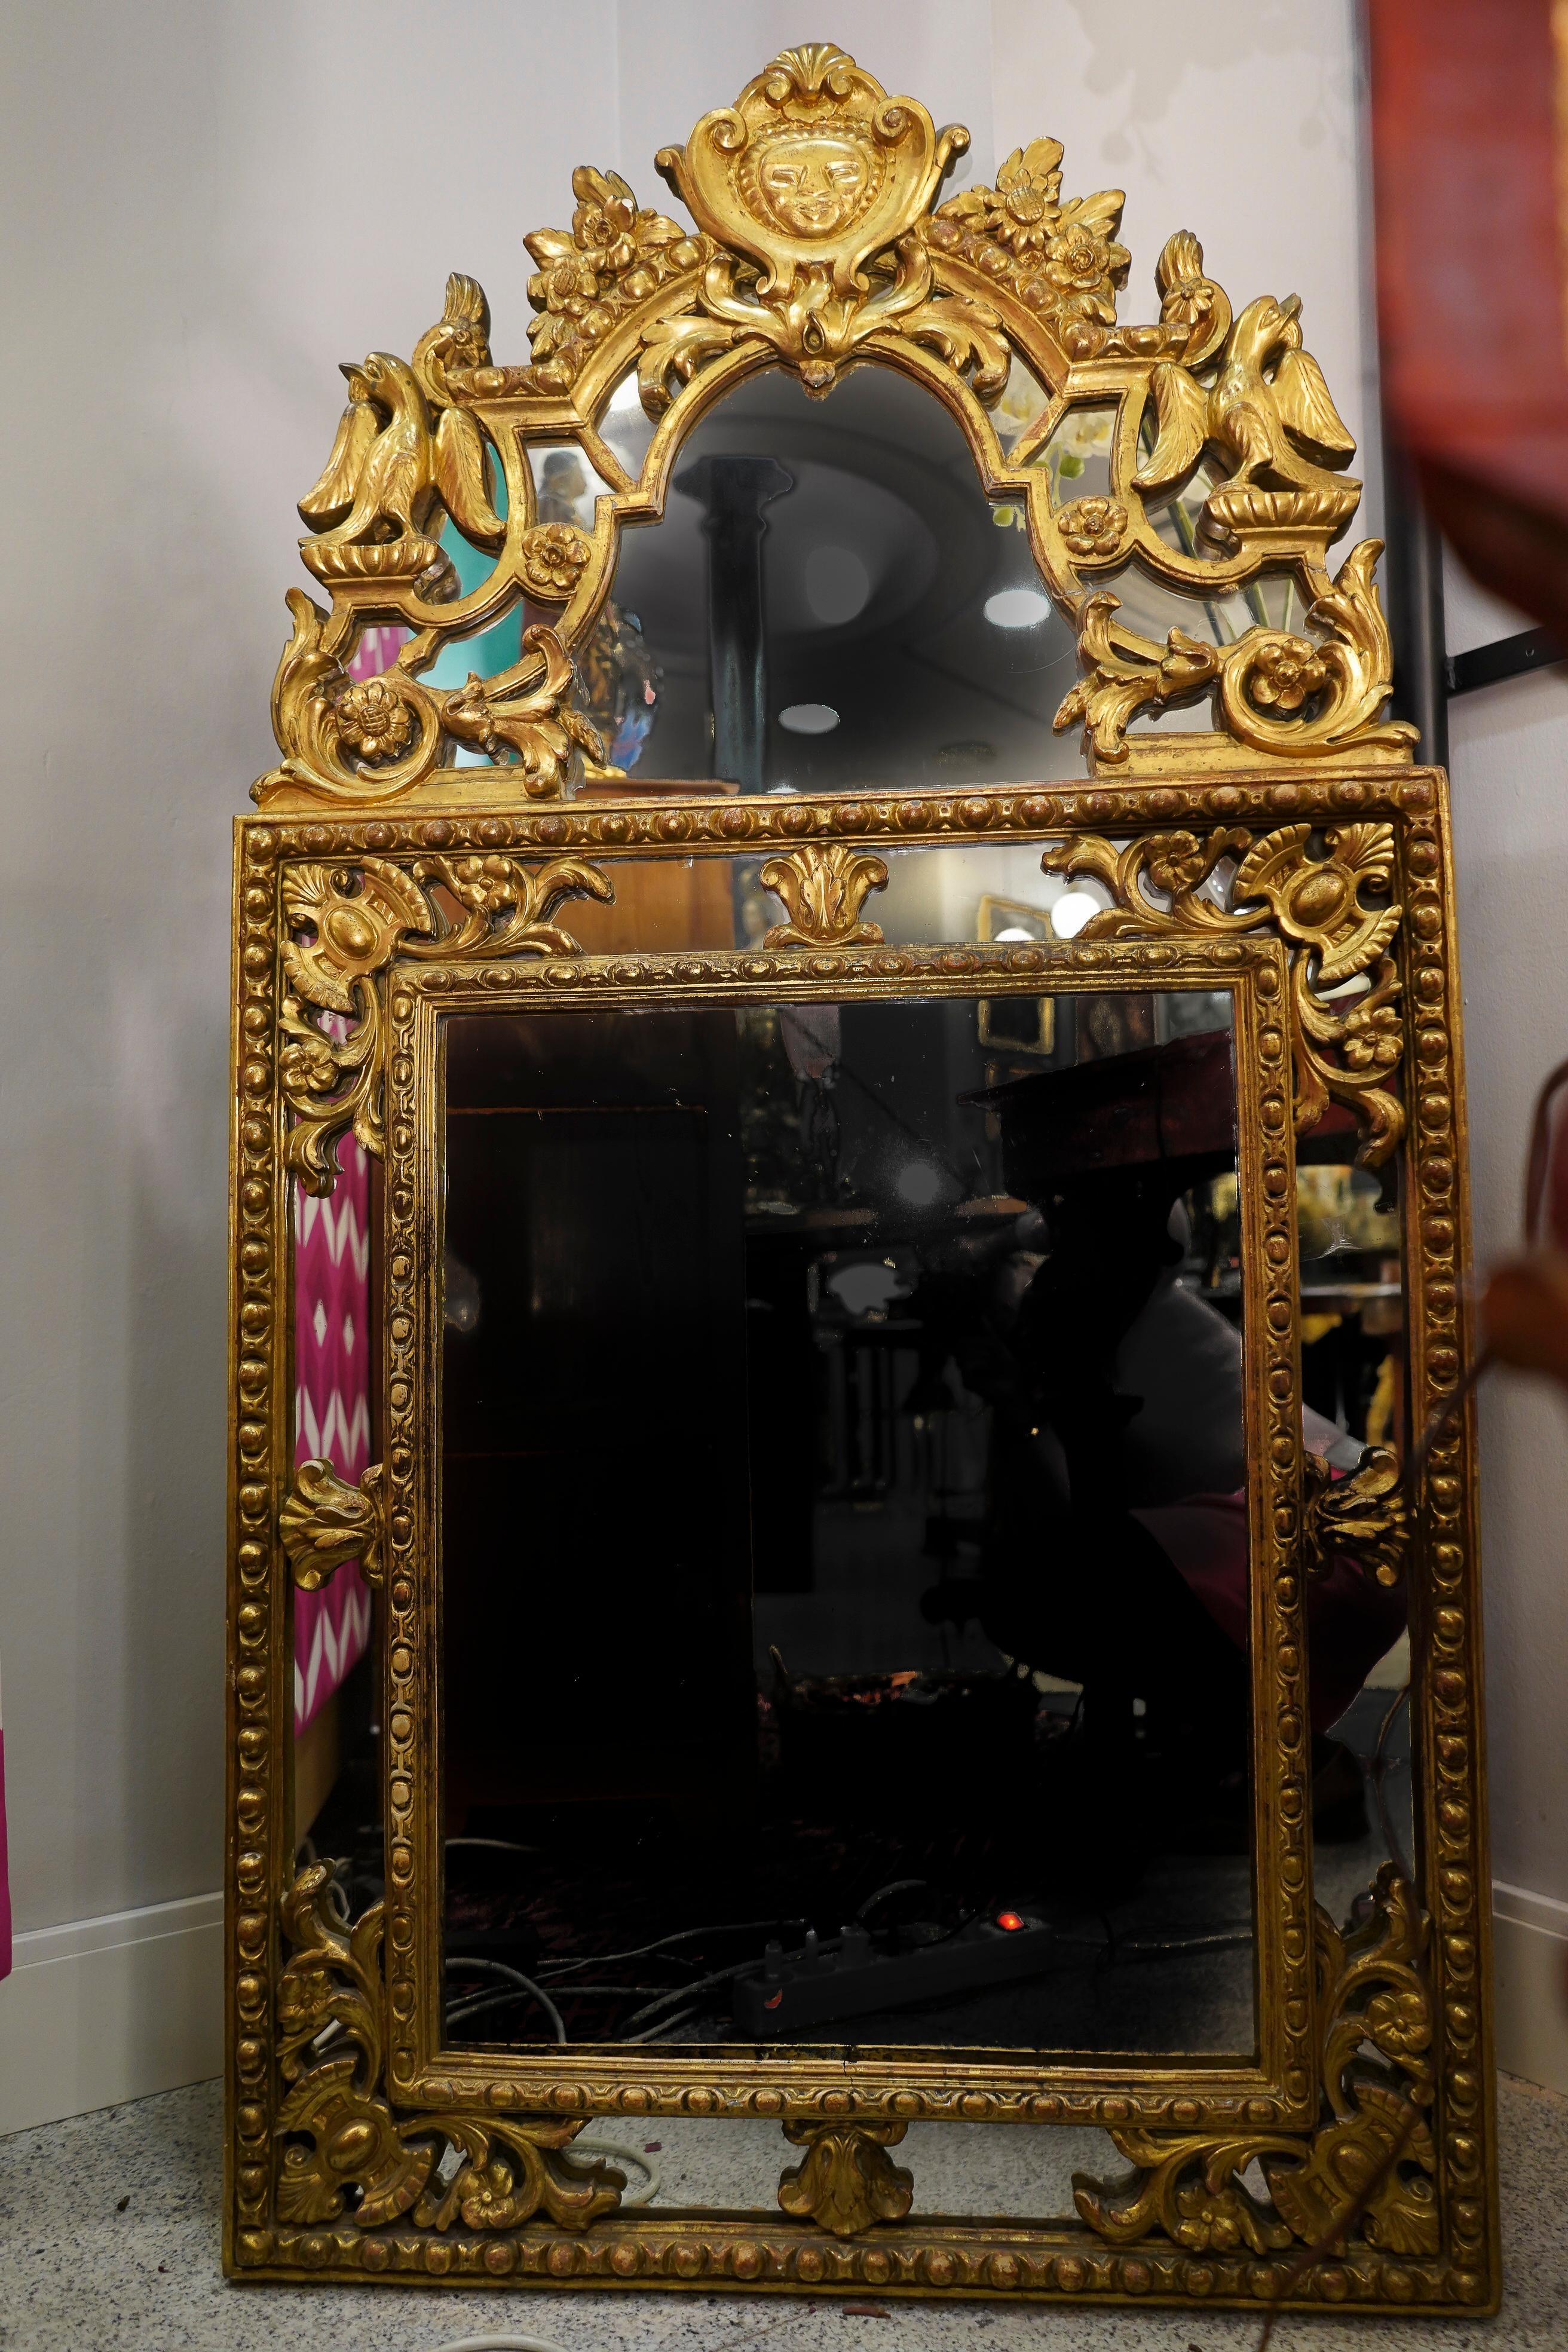 One of a king 18th century French carved and gilded mirror. Double glass mirror with floral carving and rolls, top of the mirror with 2 framed eagle carving and king sun as symbol of King Luis XIV
It’s an exceptional mirror to hold in a master